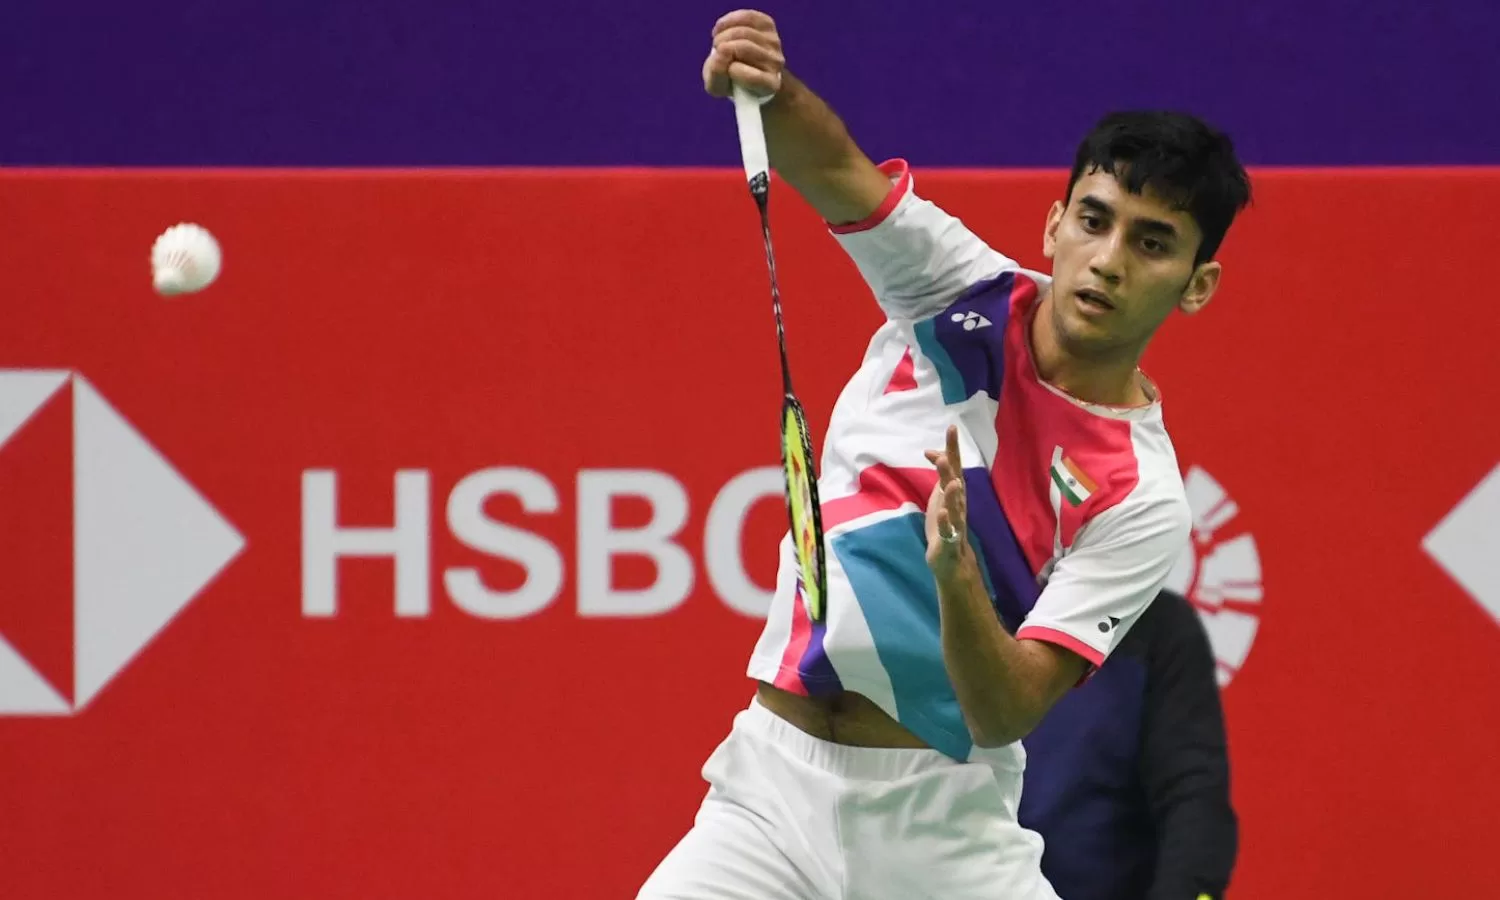 Lakshya Sen unofficially confirms his place at the Paris Olympics